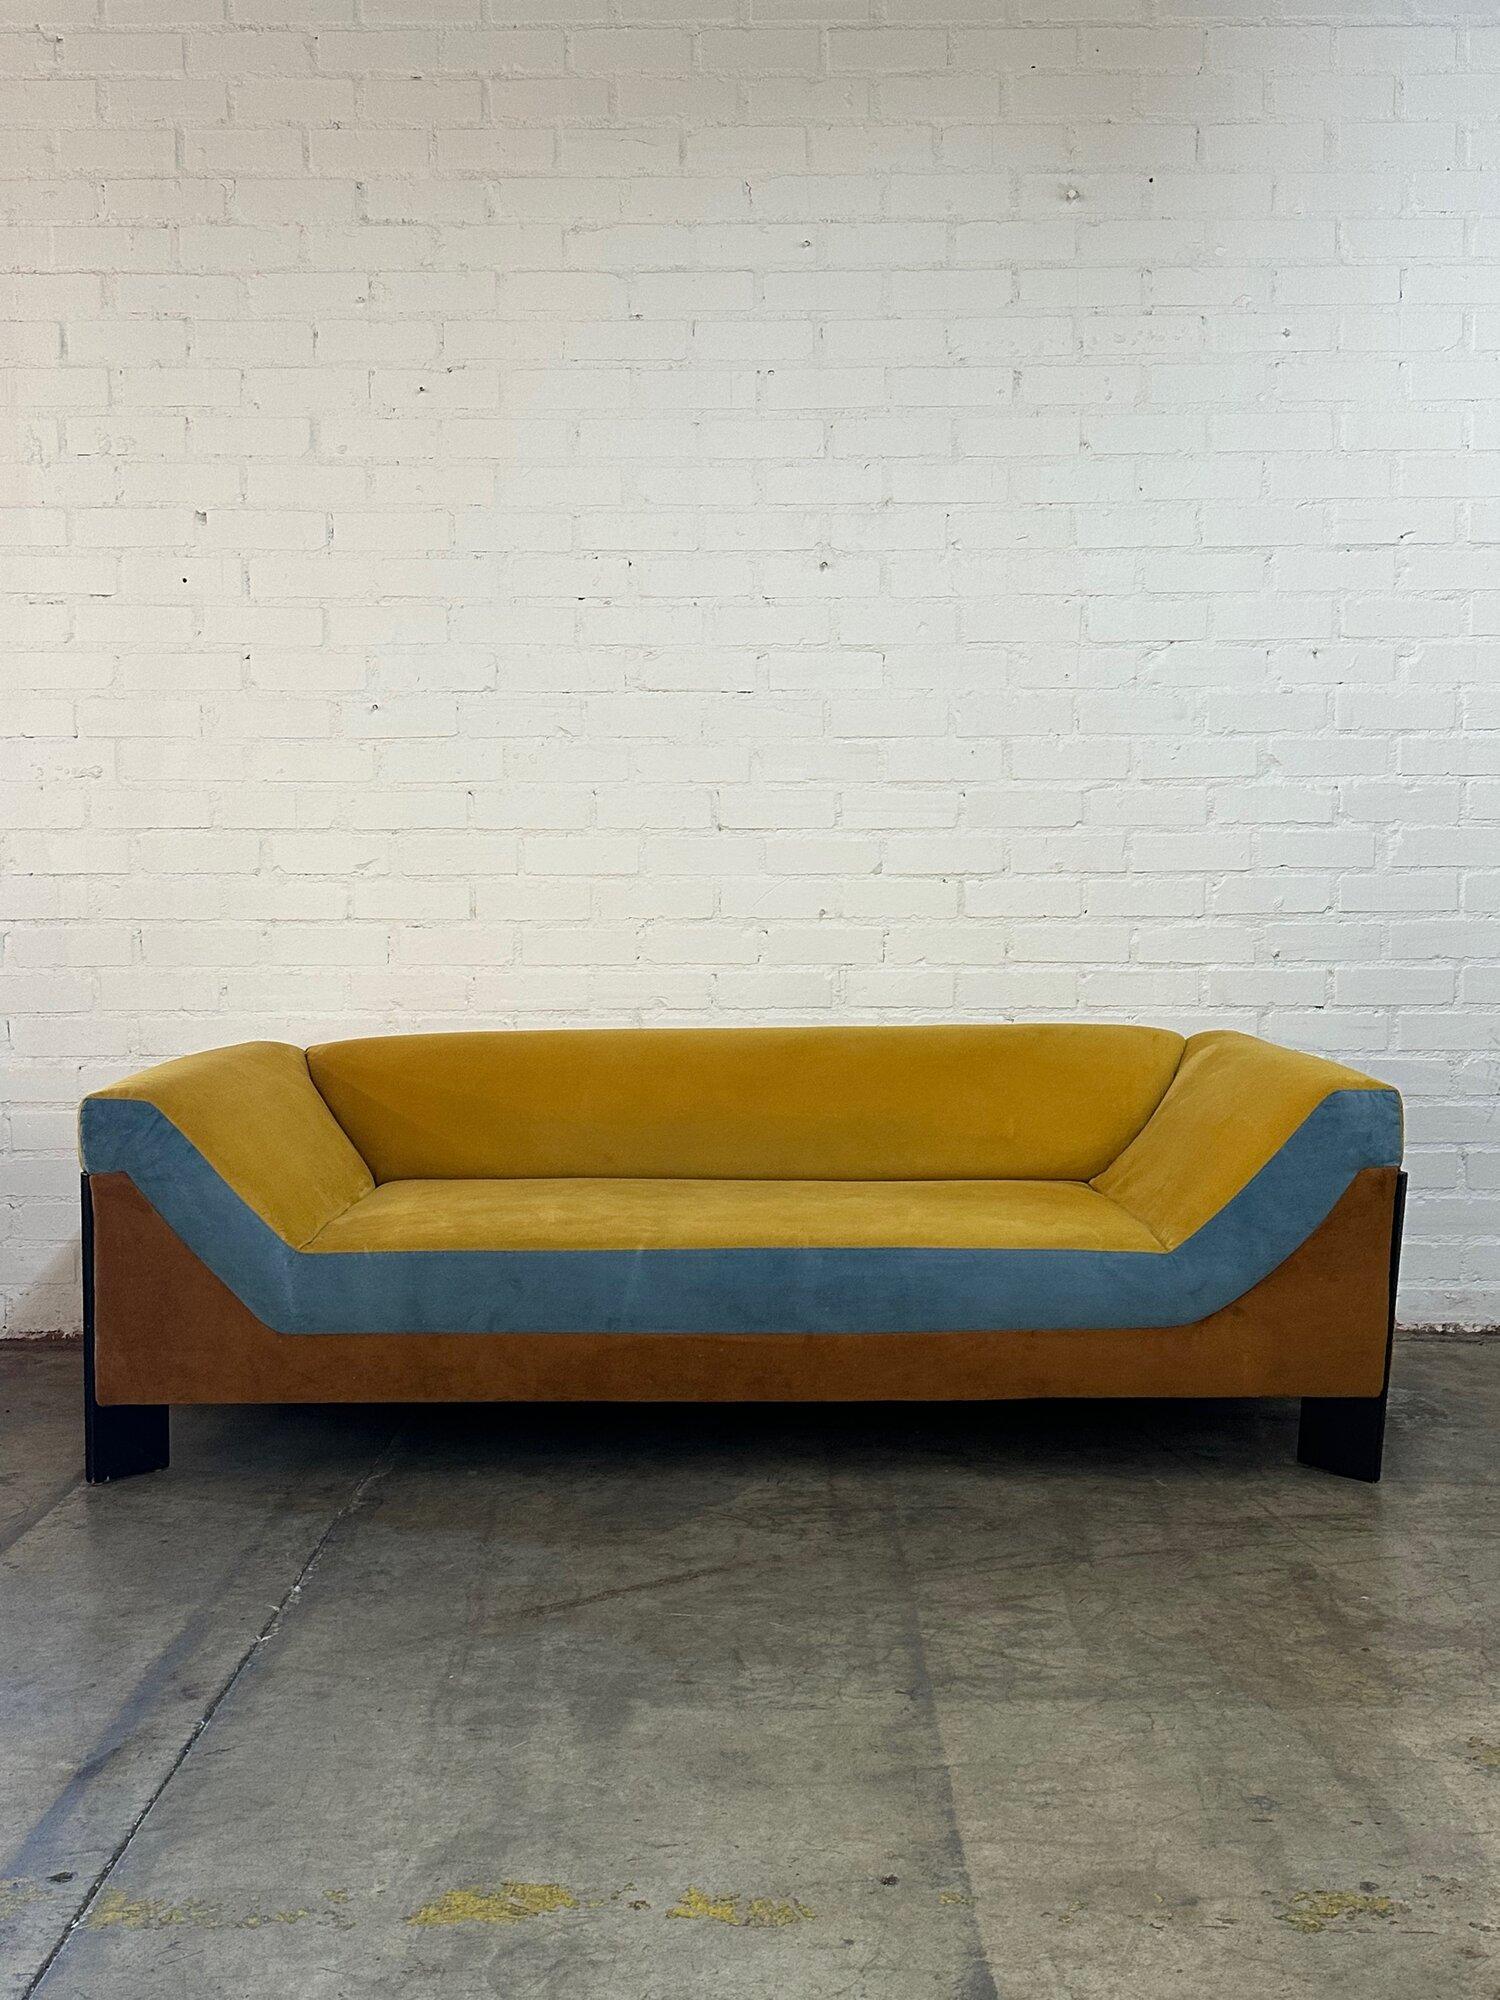 W90 D36.5 H28 SW59 SD27 SH13 AH13

This used Open Arms Sofa” is a custom piece made by Vintage On Point. Was made in house, here at our Los Angeles warehouse location. Upholstery is reminiscent of 70’s style vibrant colors in velvet. Since it’s used